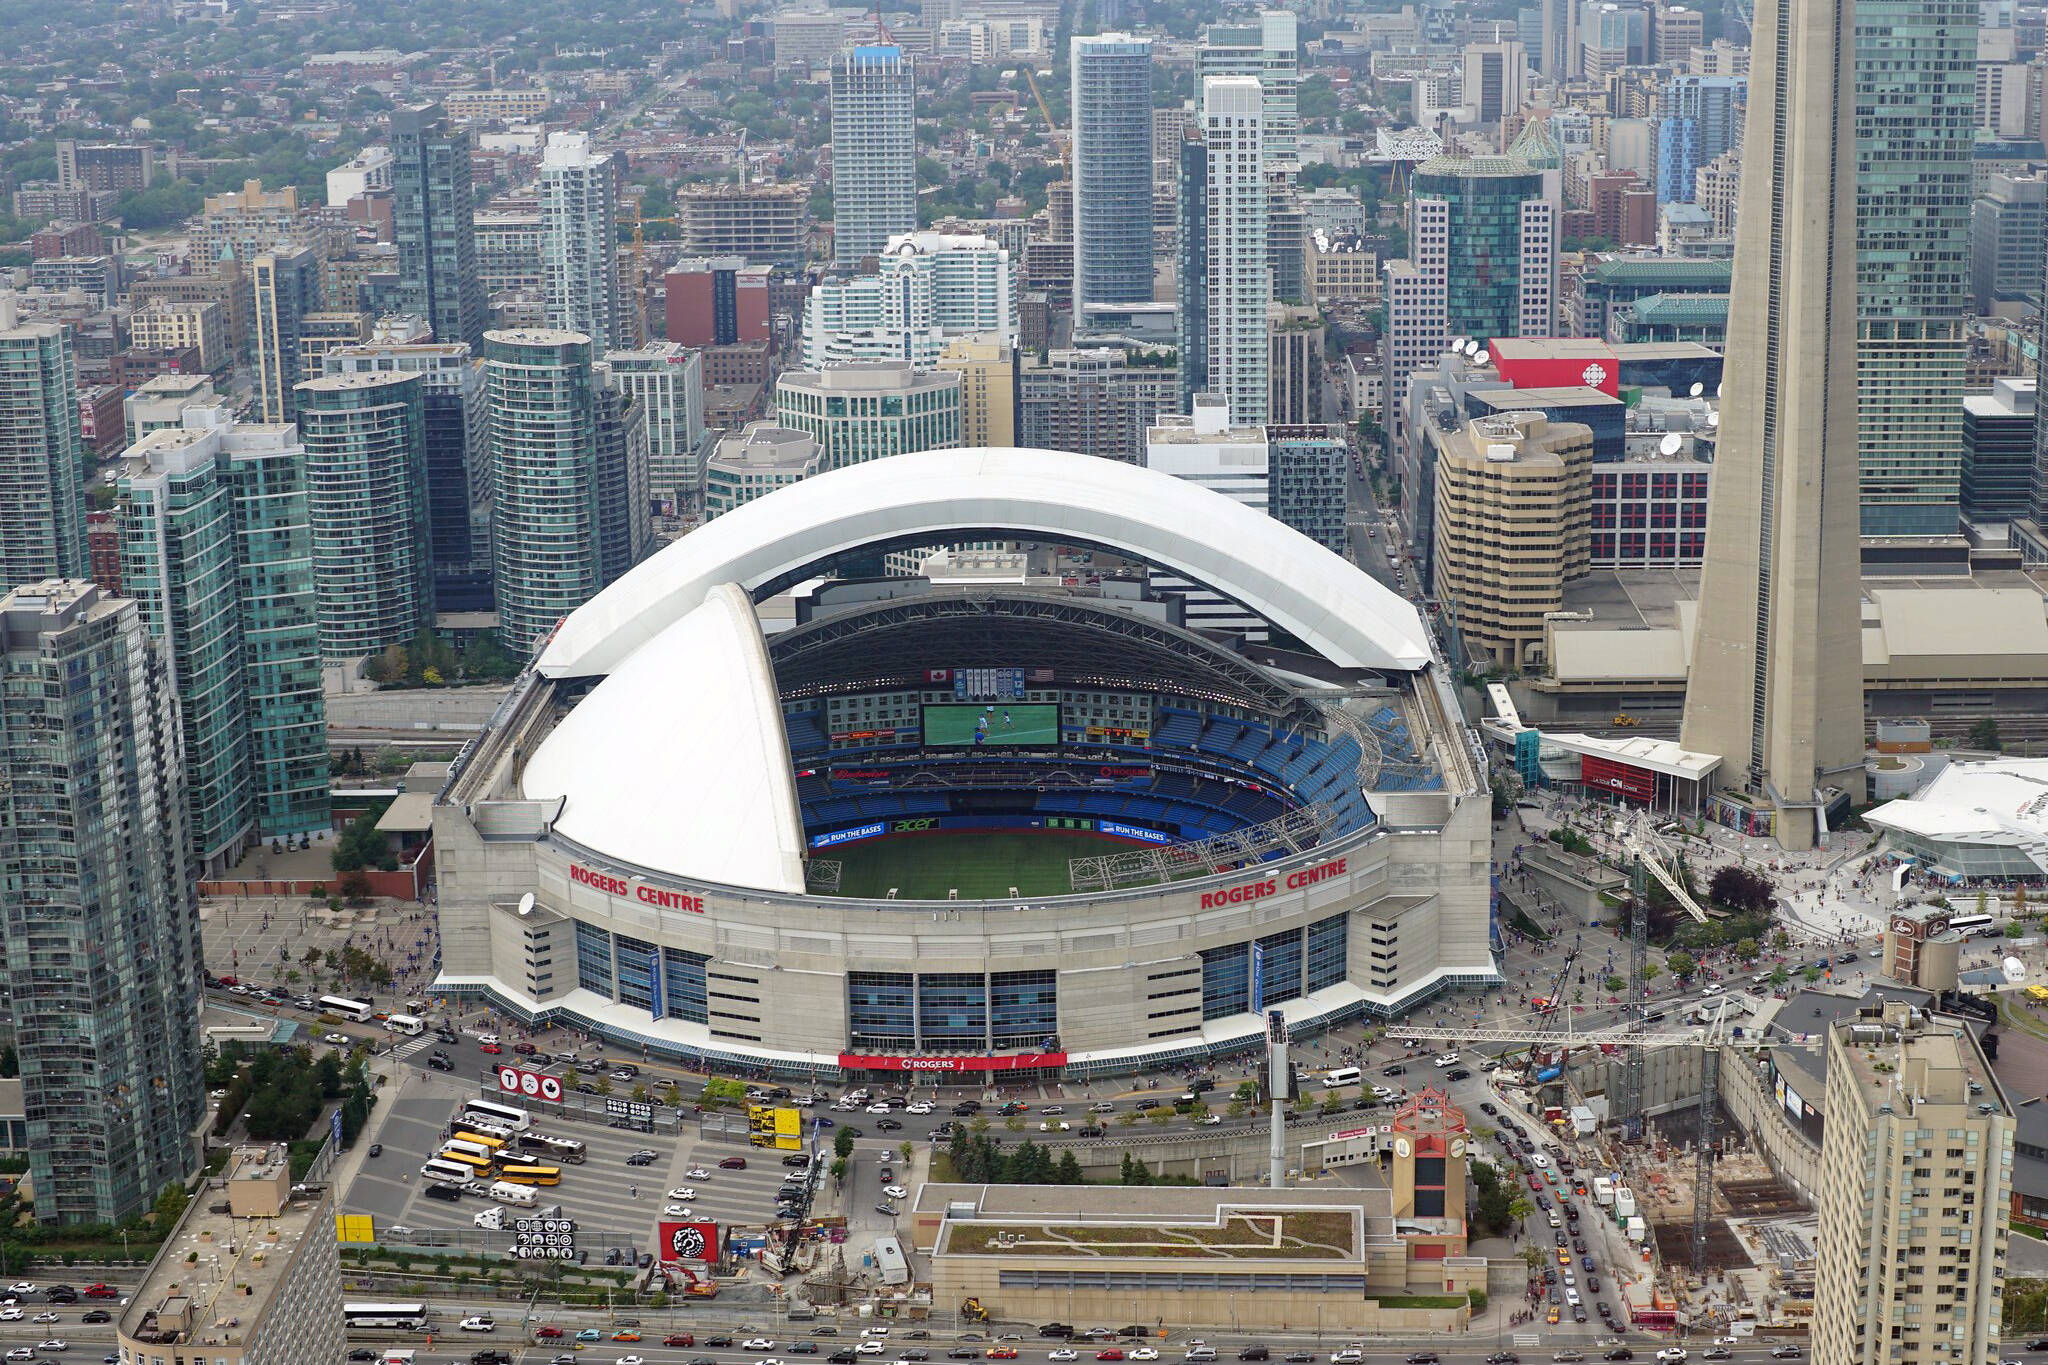 Rogers wants to demolish the SkyDome and build a new home for the